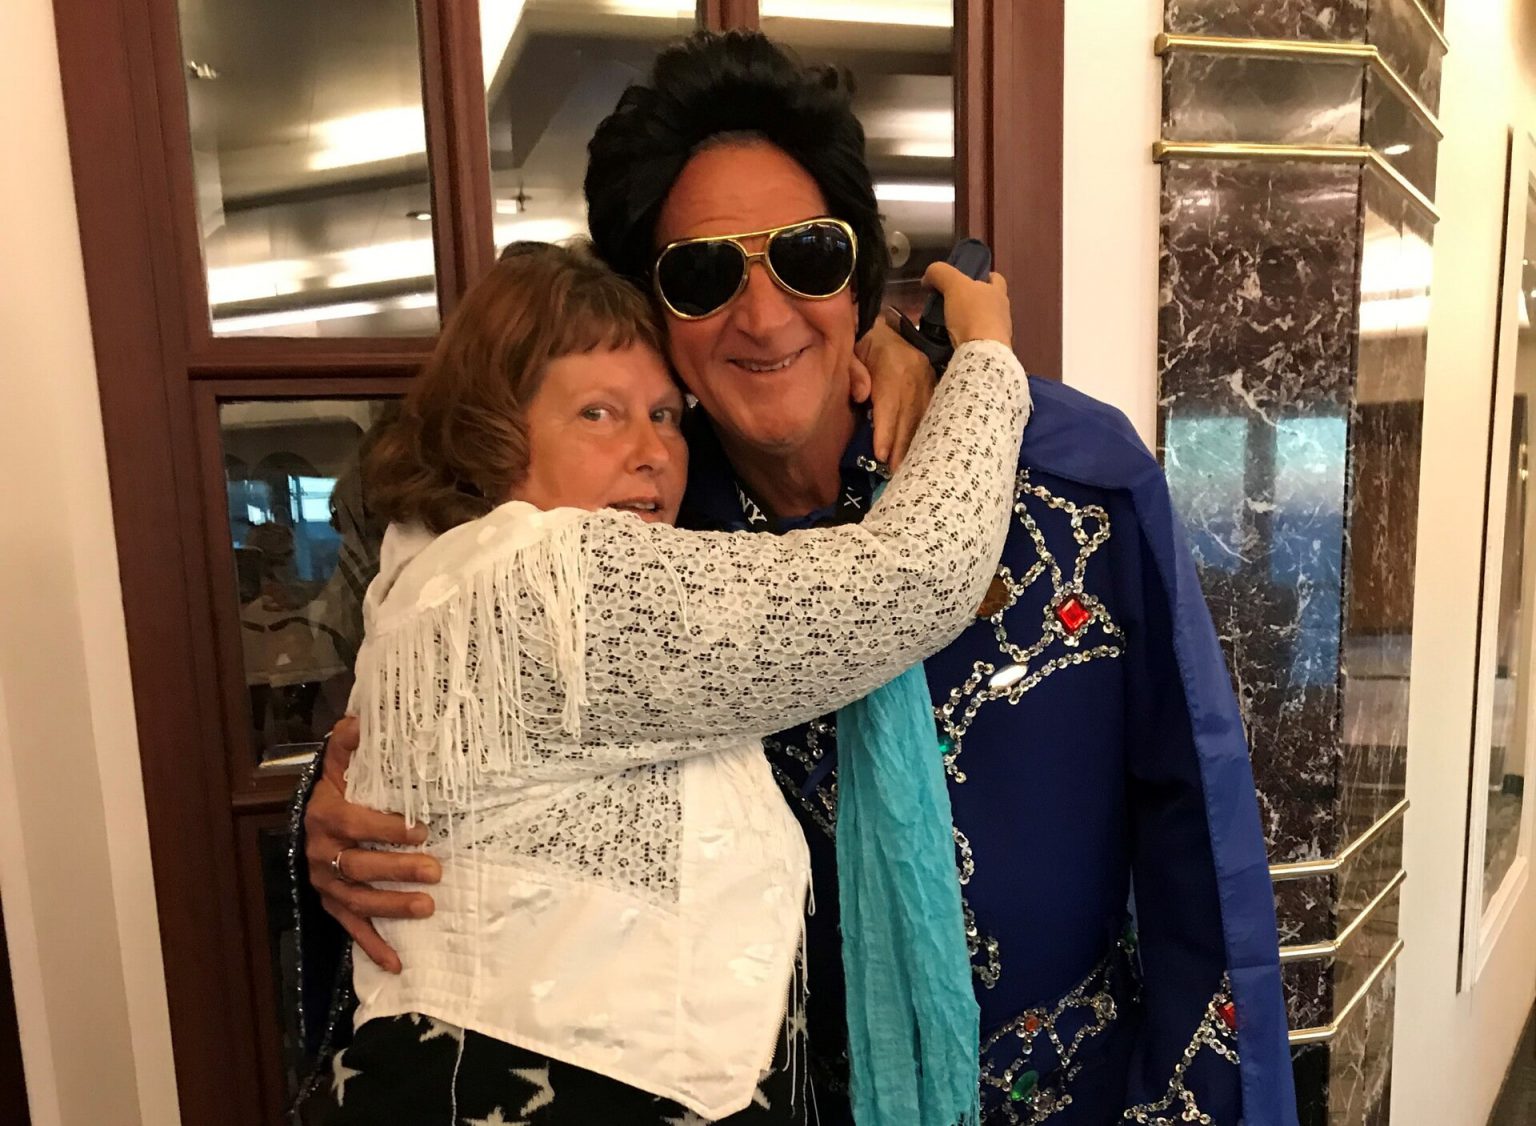 A person and elvis impersonater posing for a picture